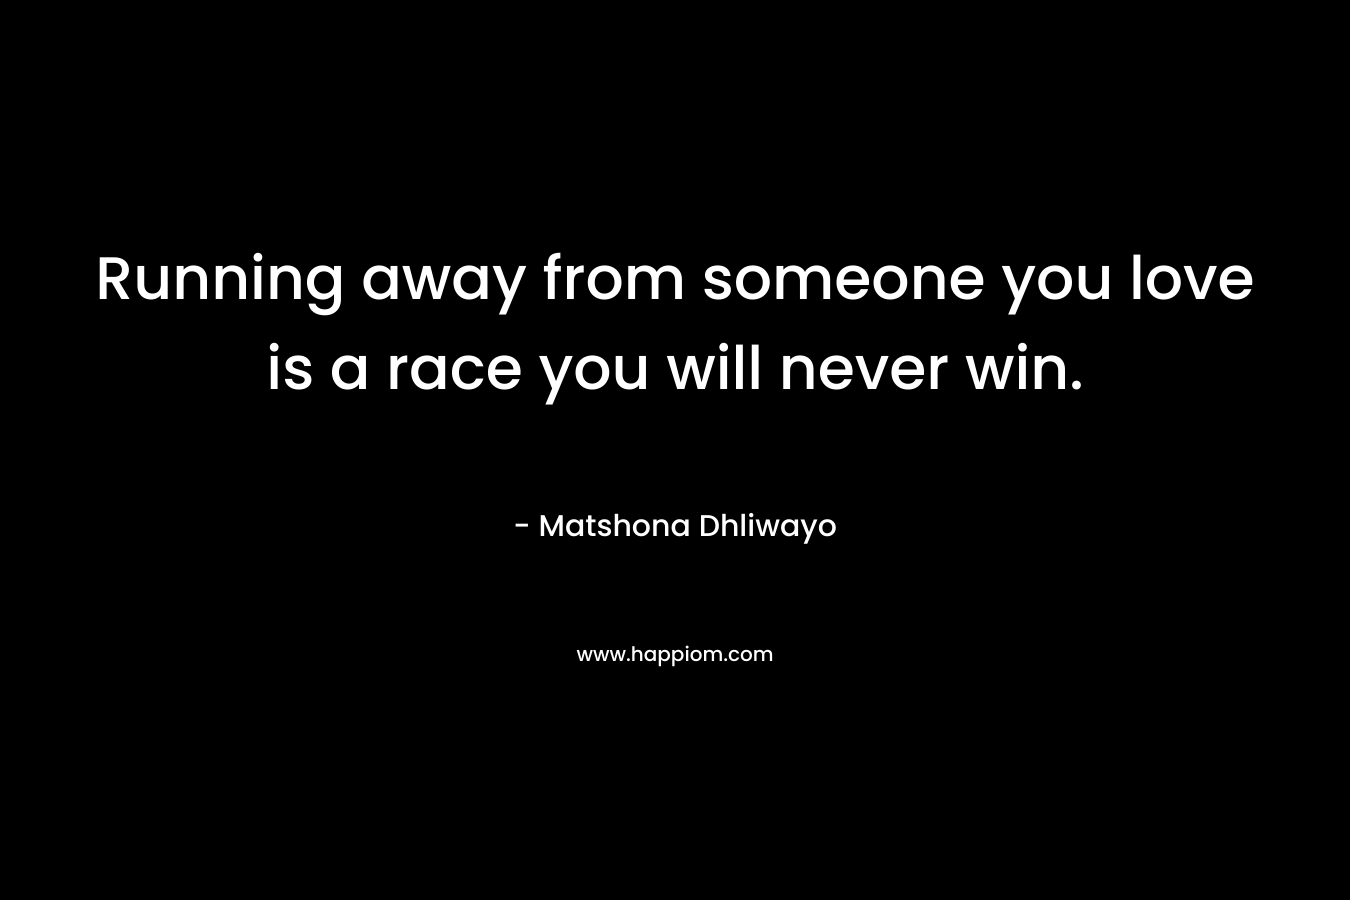 Running away from someone you love is a race you will never win. – Matshona Dhliwayo